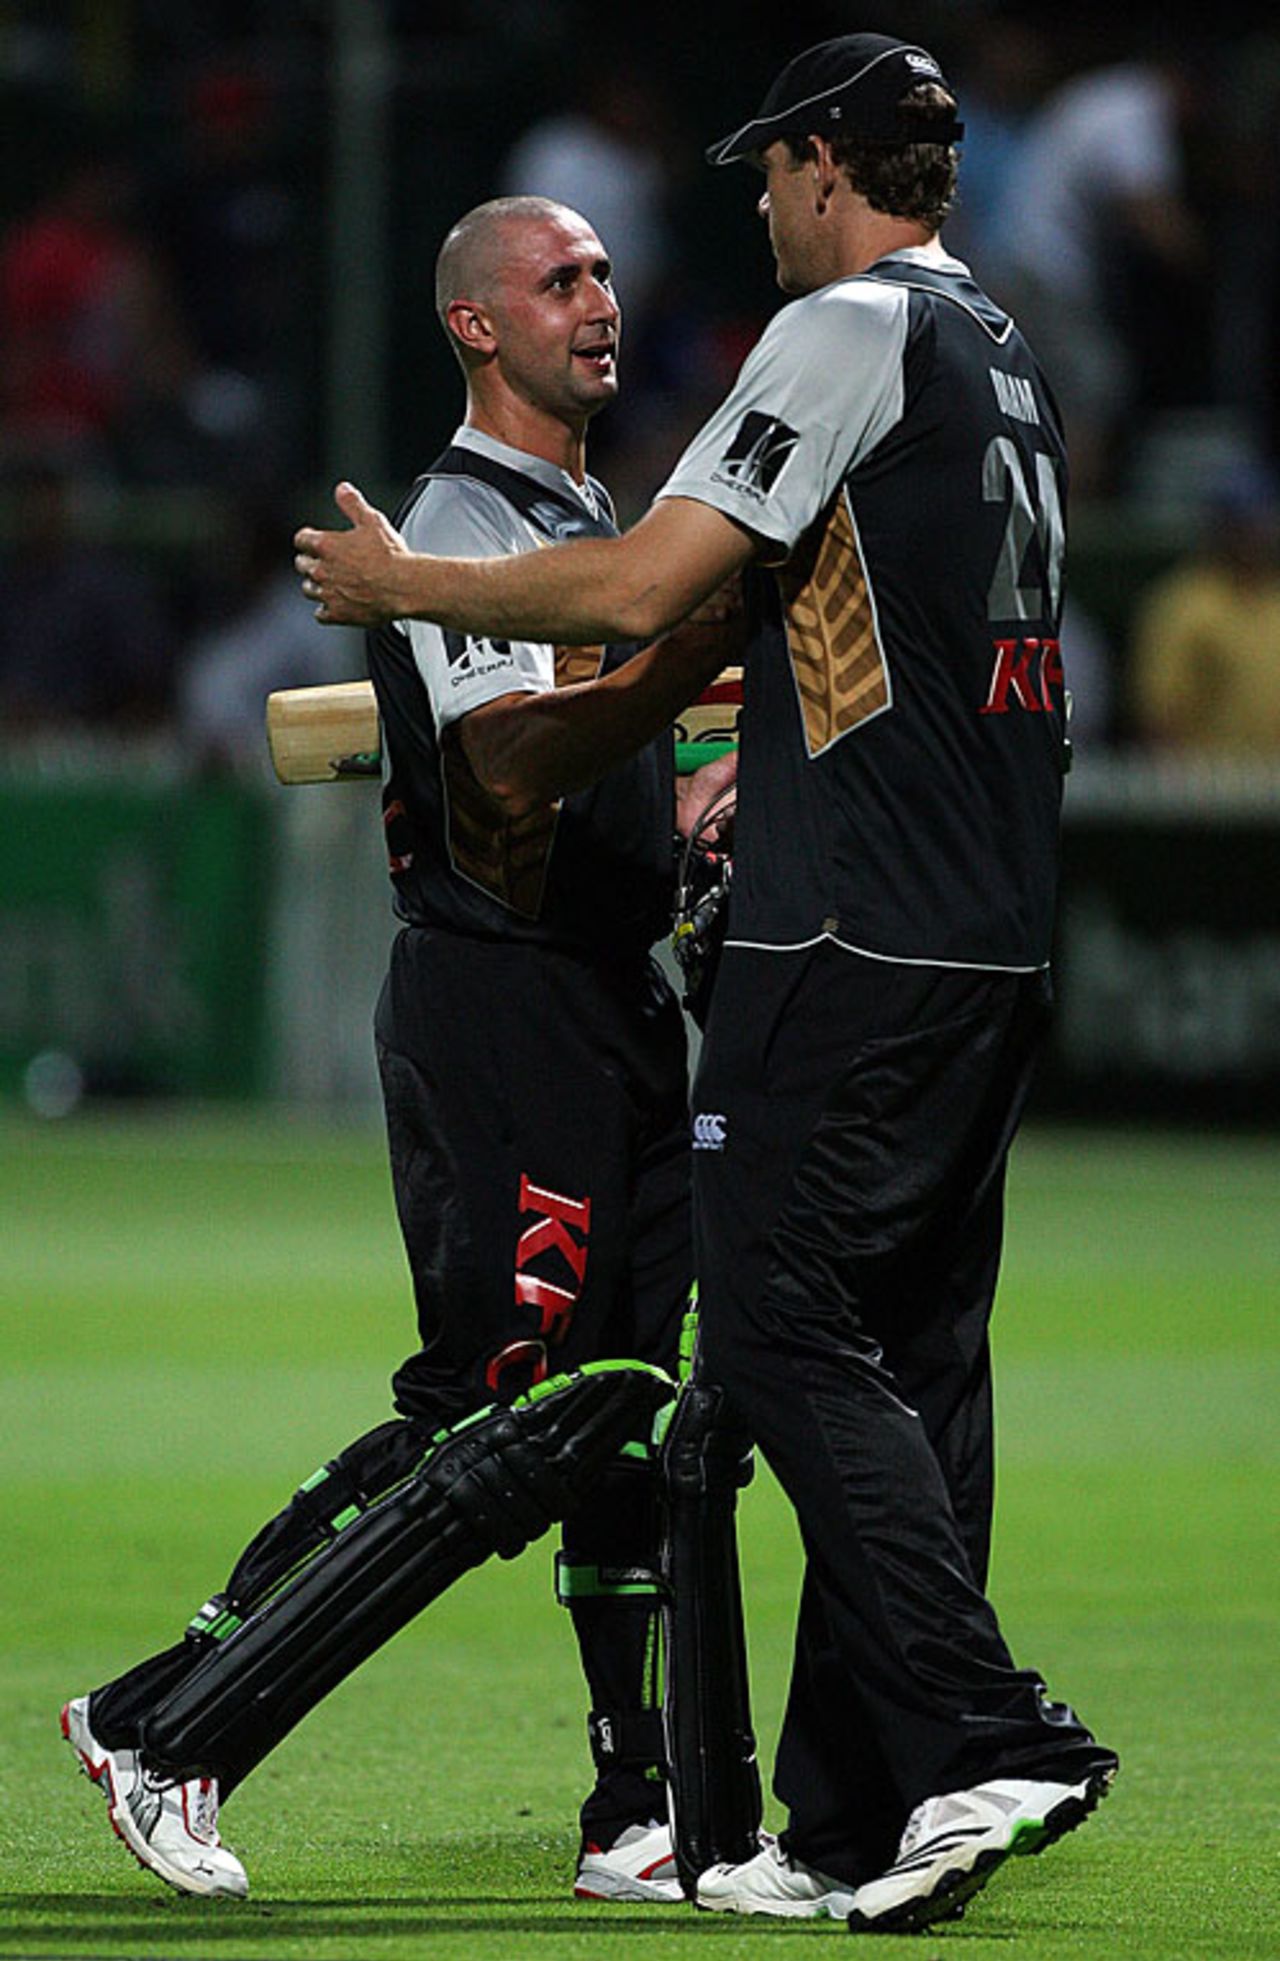 Peter Ingram gets a pat from Jacob Oram after sealing the win, New Zealand v Bangladesh, only Twenty20, Hamilton, February 3, 2010